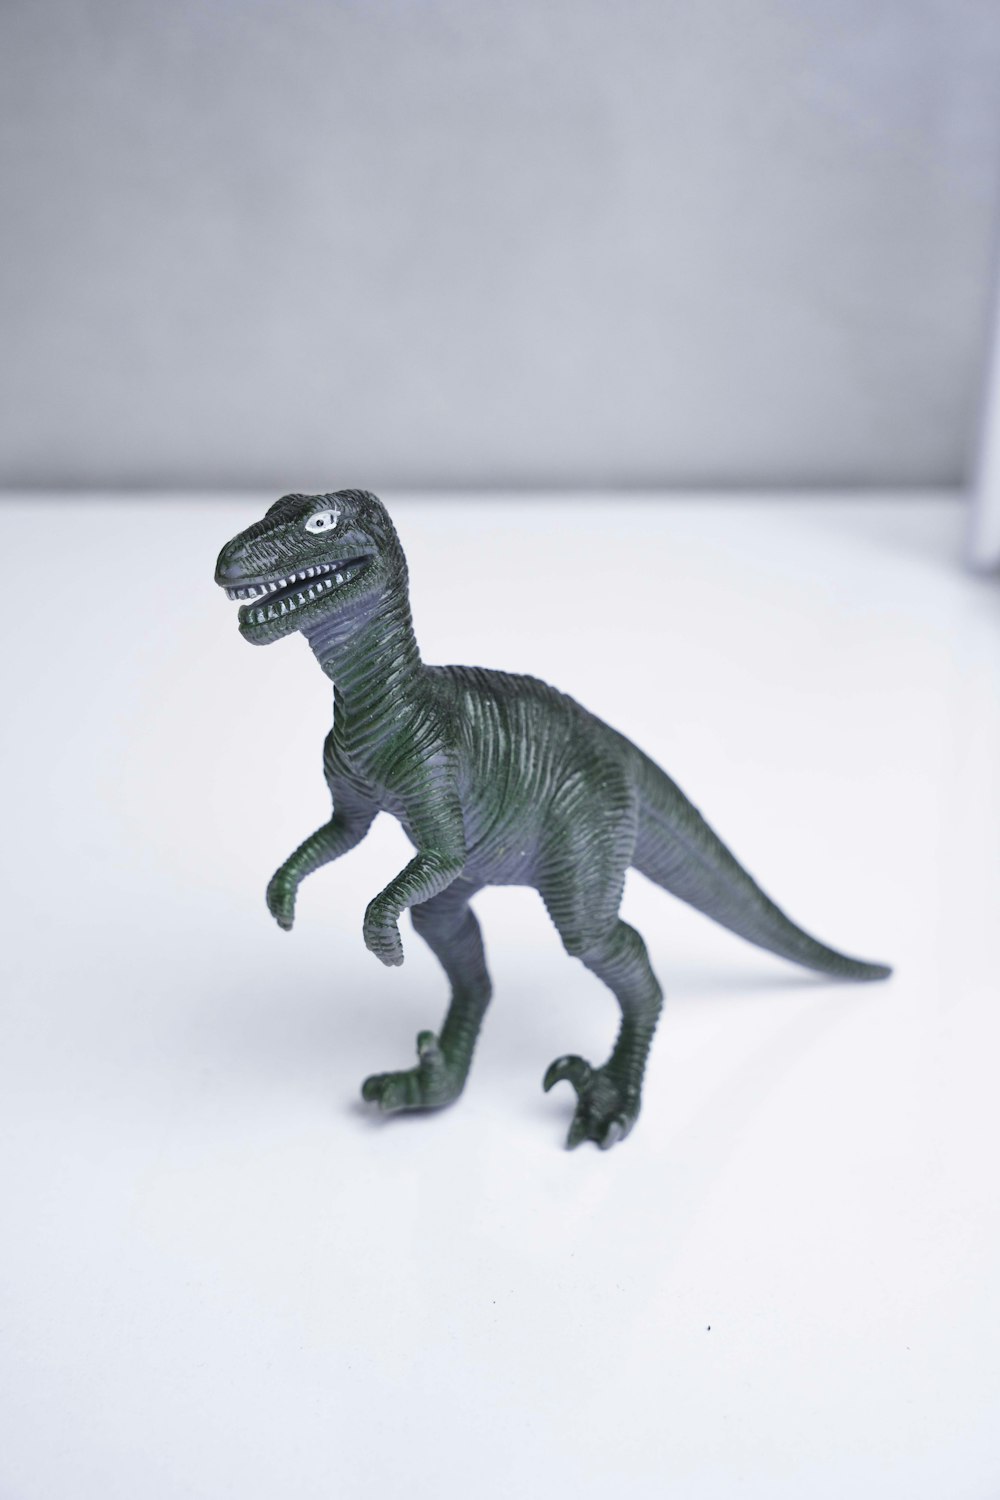 a toy dinosaur is standing on a white surface